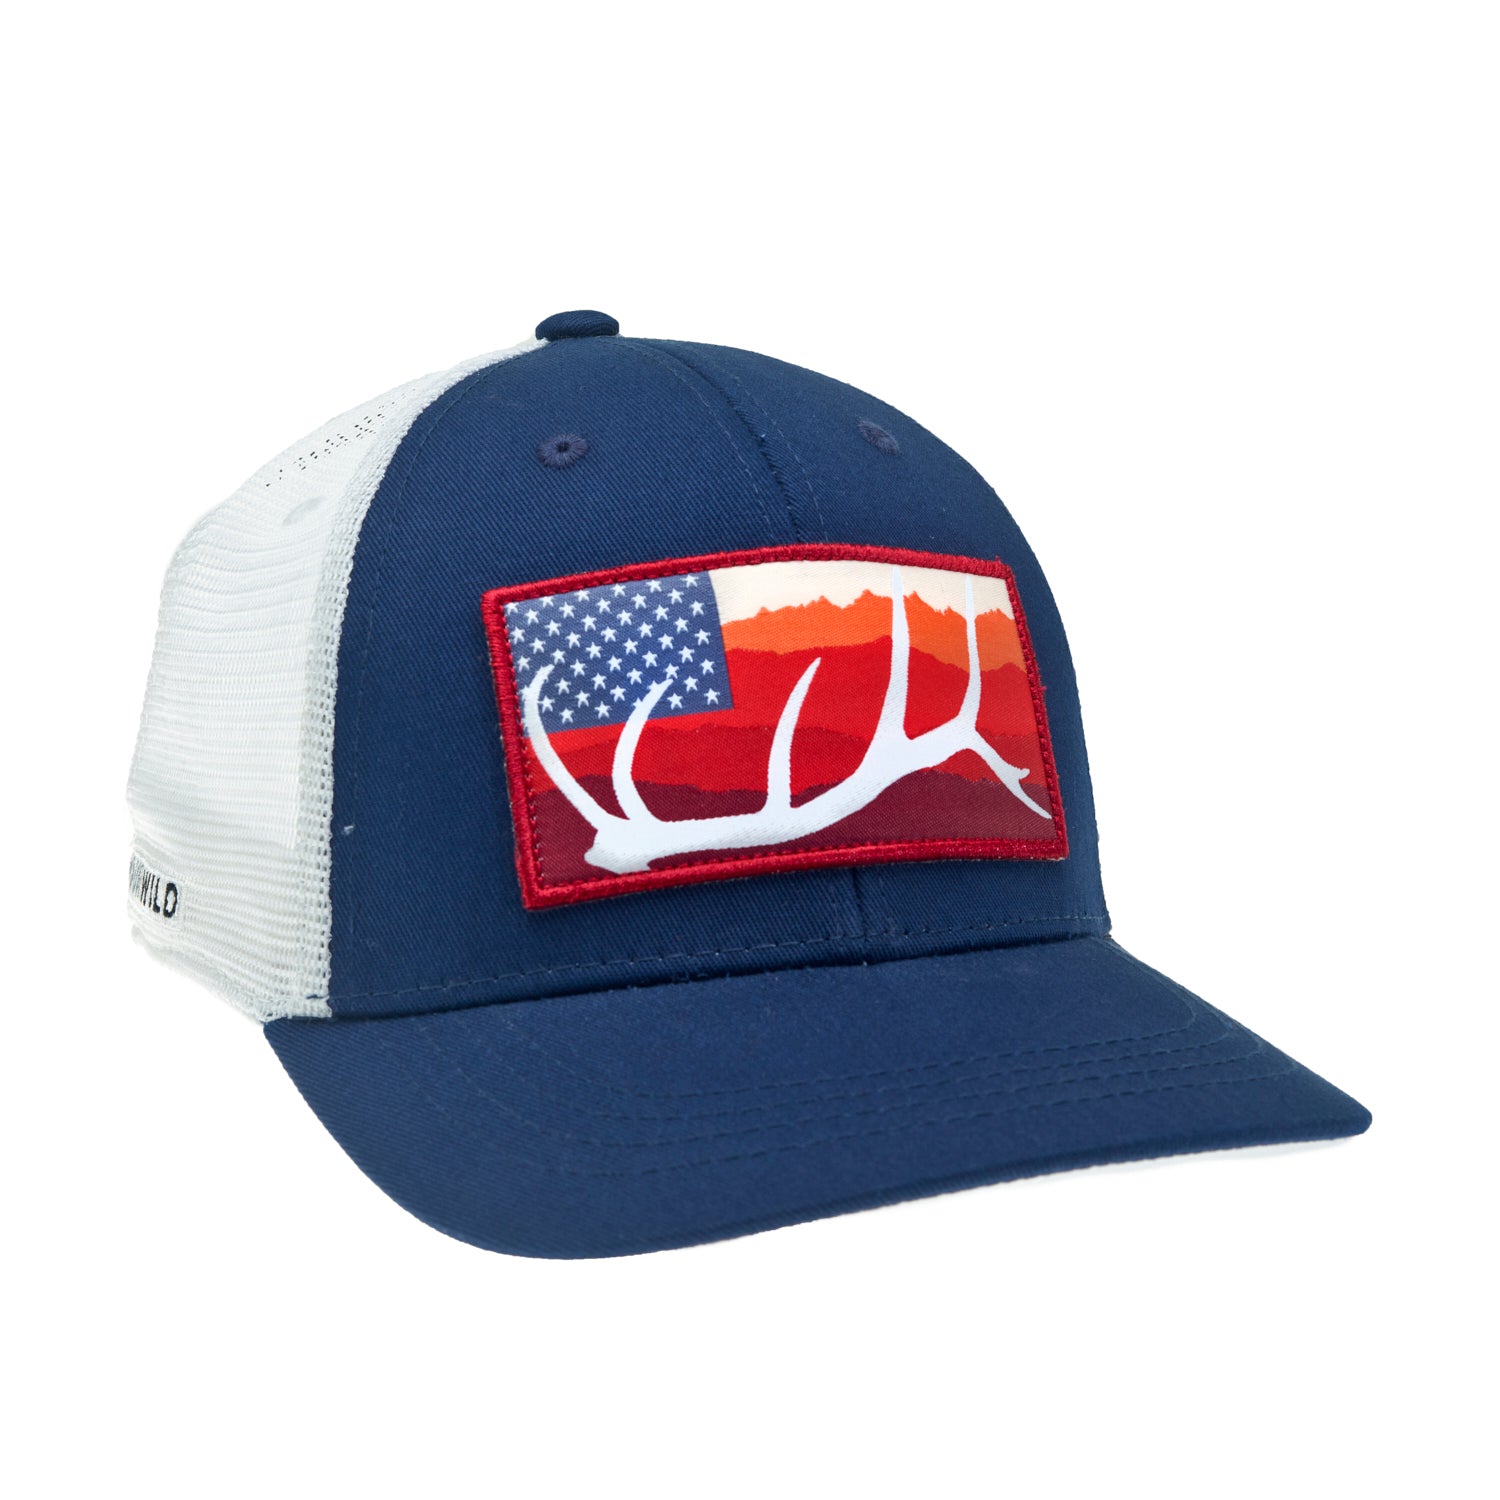 A hat with white mesh and blue fabric has a patch with an elk antler in front of mountains and 50 stars in a blue rectangle